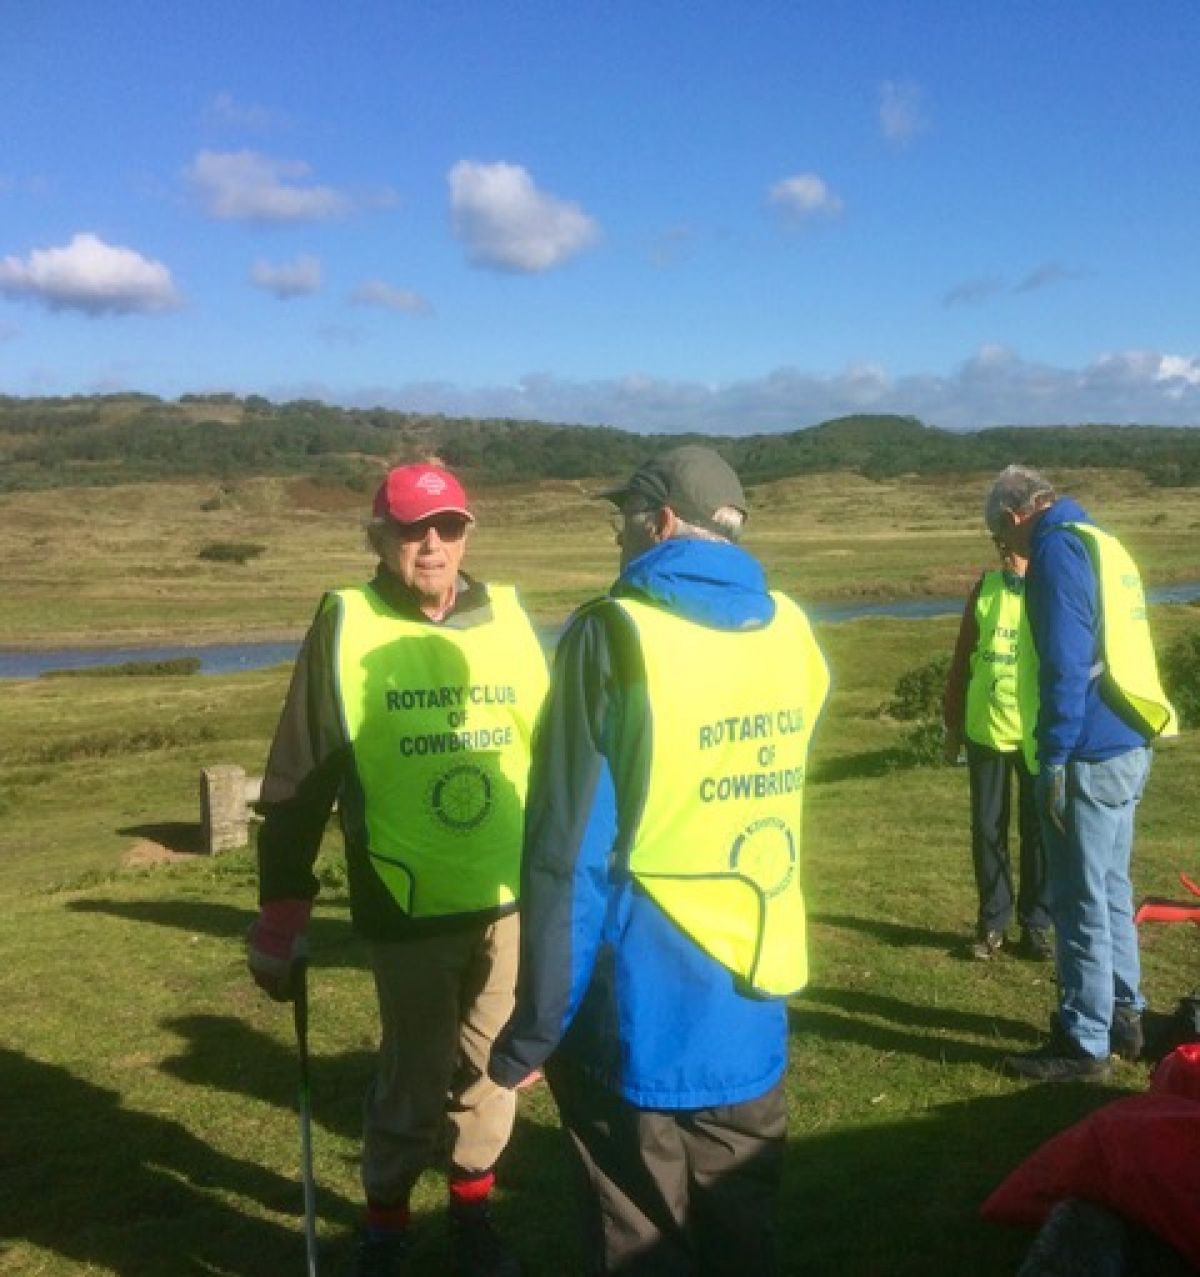 Litter pick at Ogmore - 